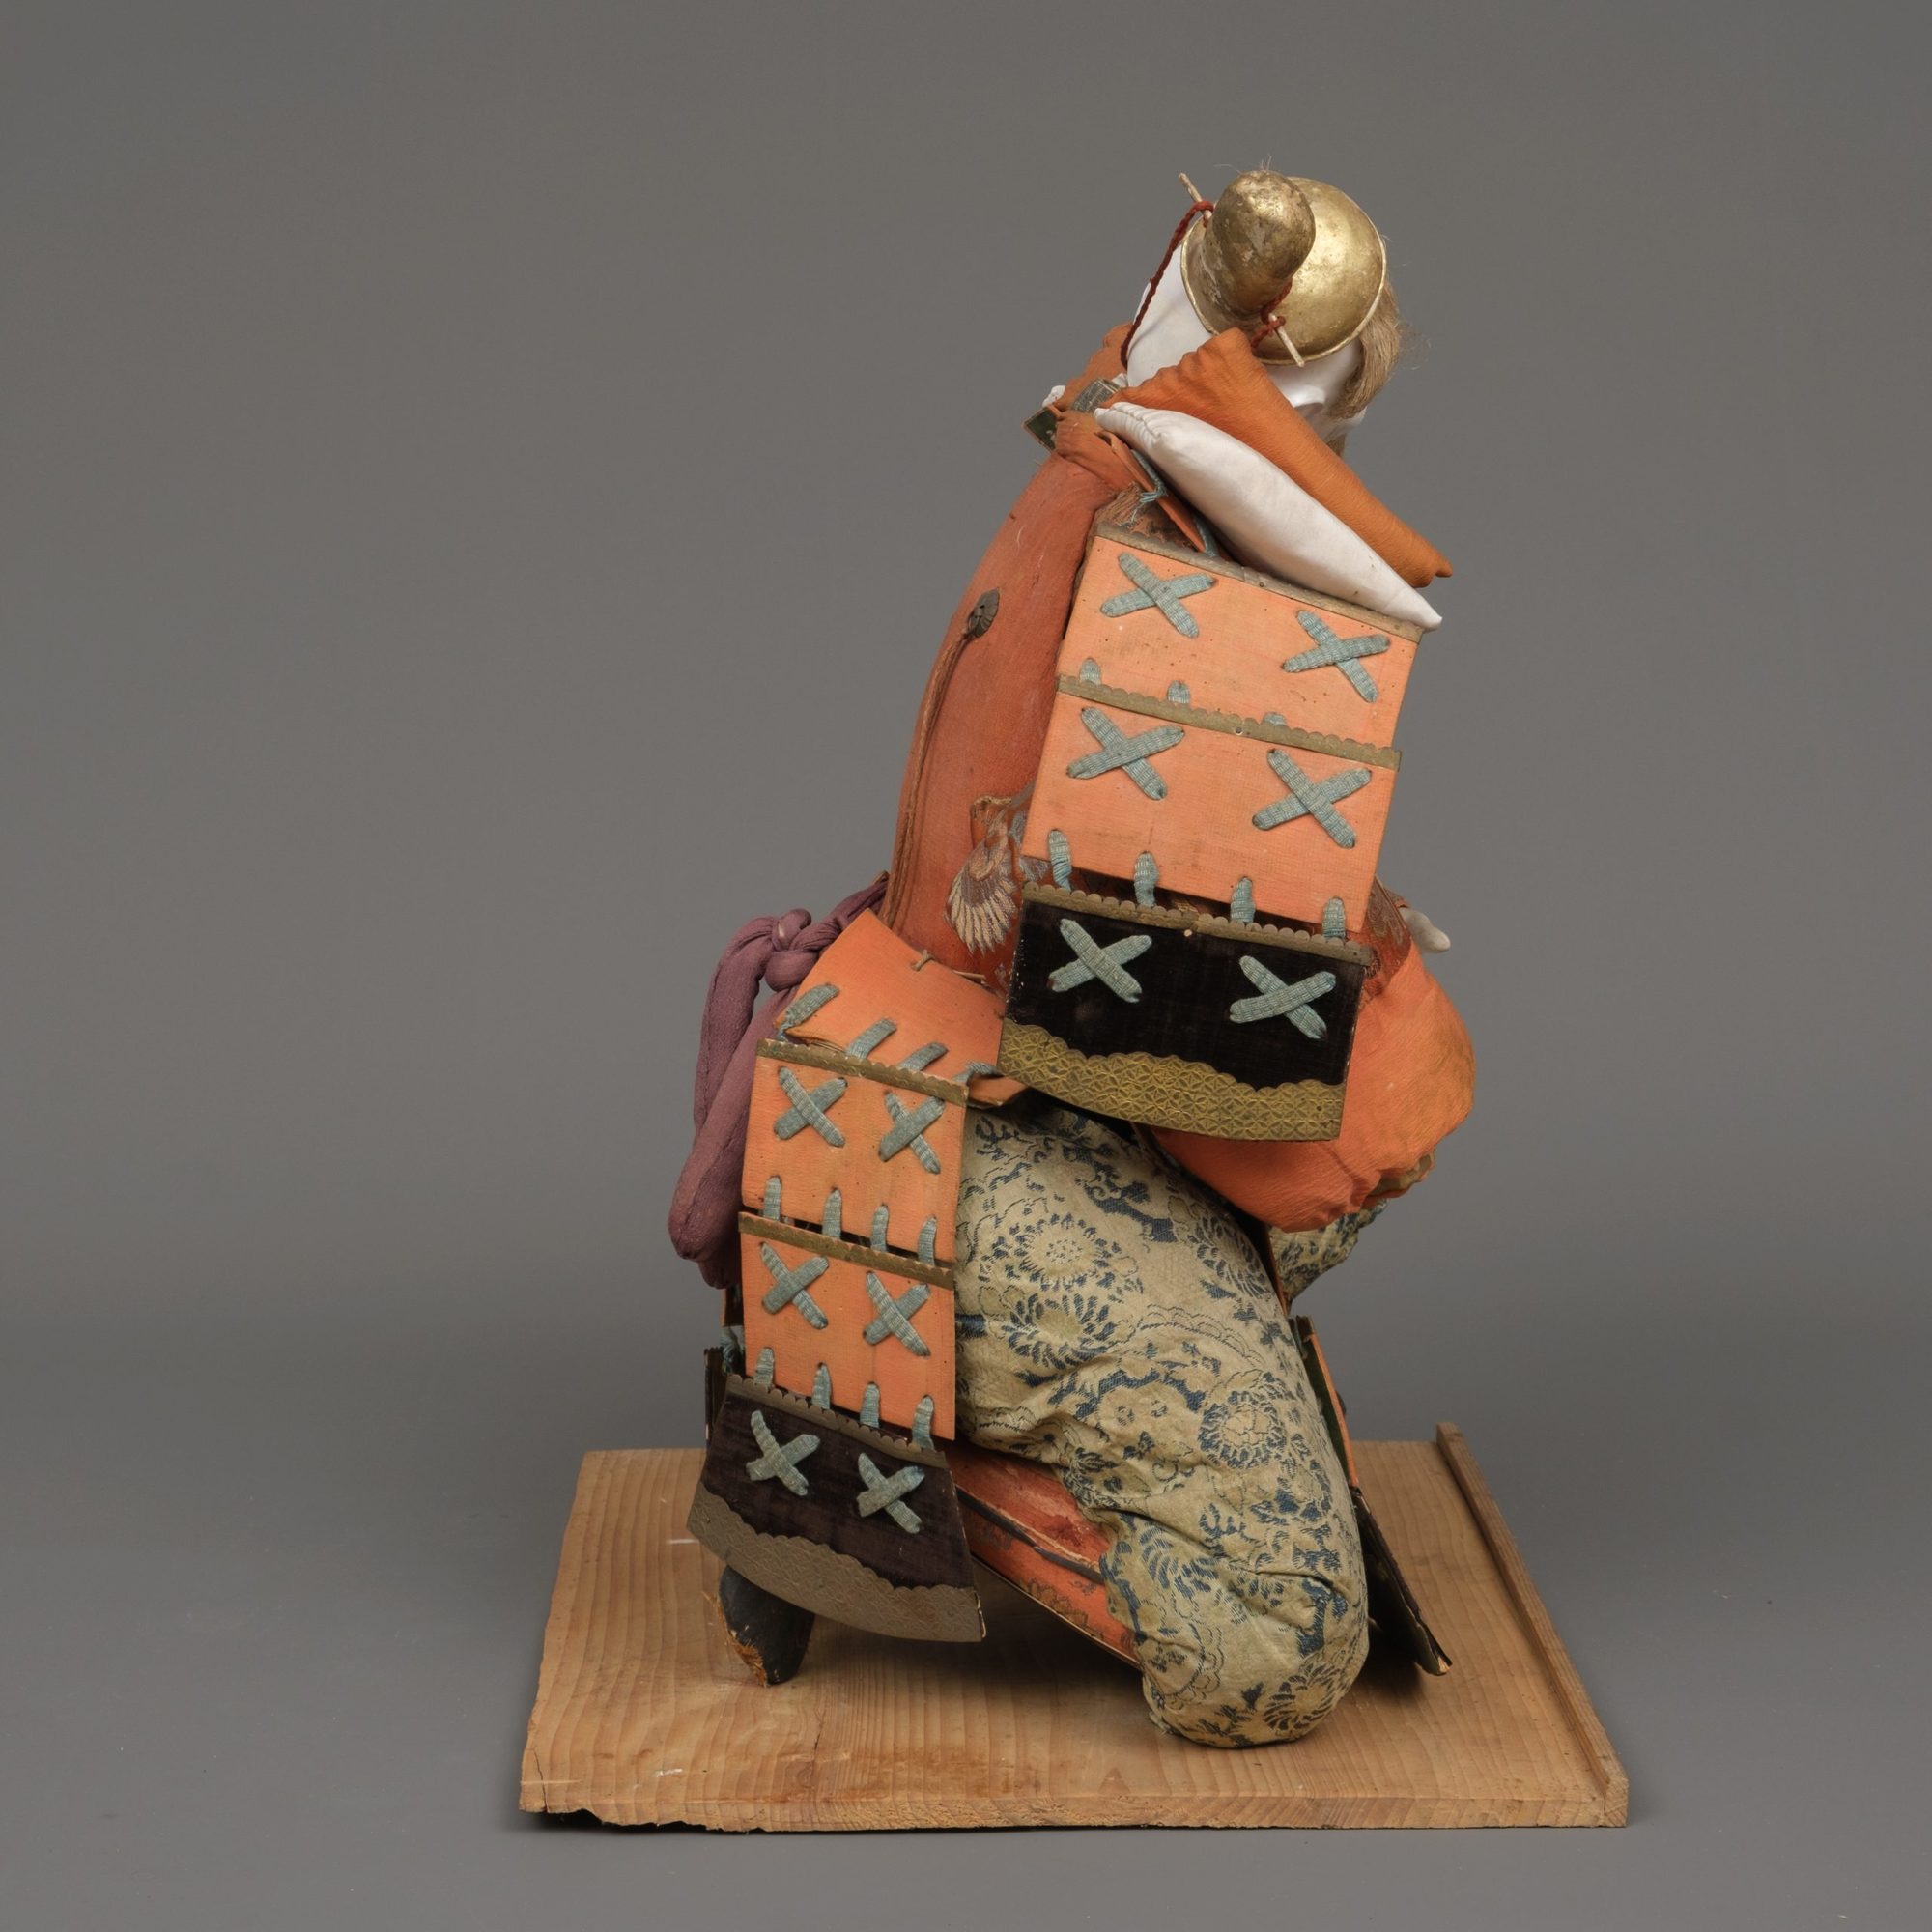 A LARGE JAPANESE HAND-CRAFTED WARRIOR DOLL, 18TH CENTURY - Image 3 of 6